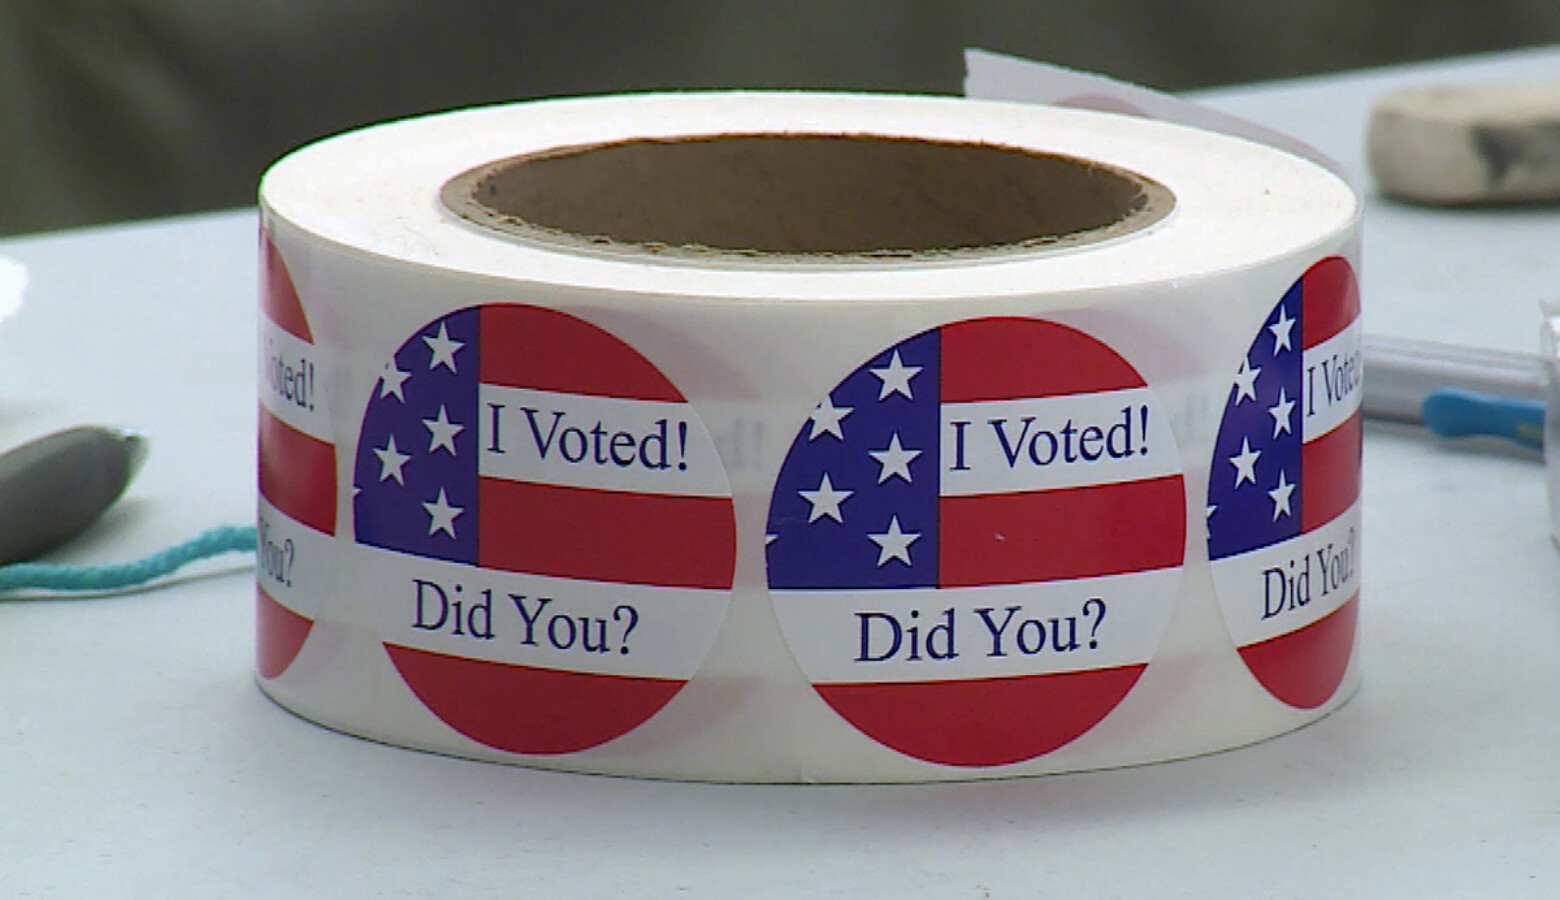 Nearly 550,000 Hoosiers requested absentee ballots for the 2020 primary - a huge increase from prior years after the state expanded vote-by-mail to anyone who wanted it. (FILE PHOTO: Steve Burns/WTIU)